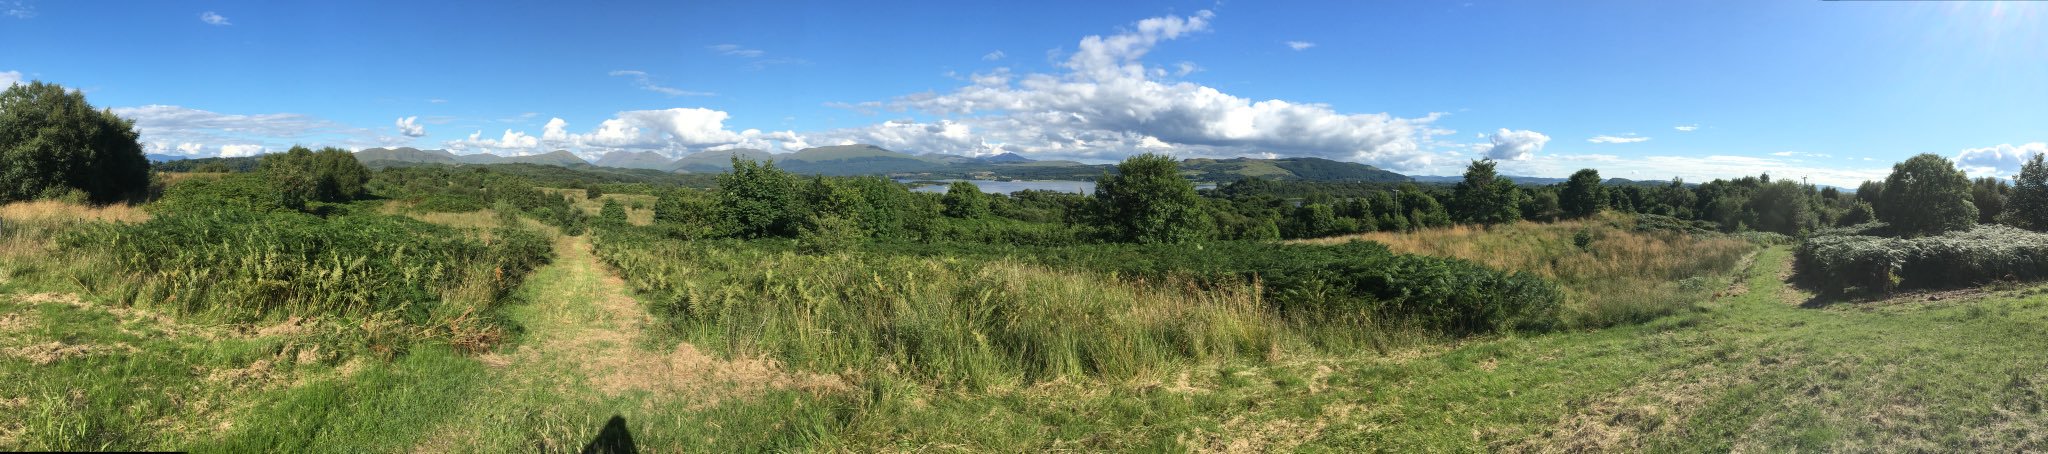 View from our hotel, the Isle of Eriska. https://t.co/mD9TRz3ZhI